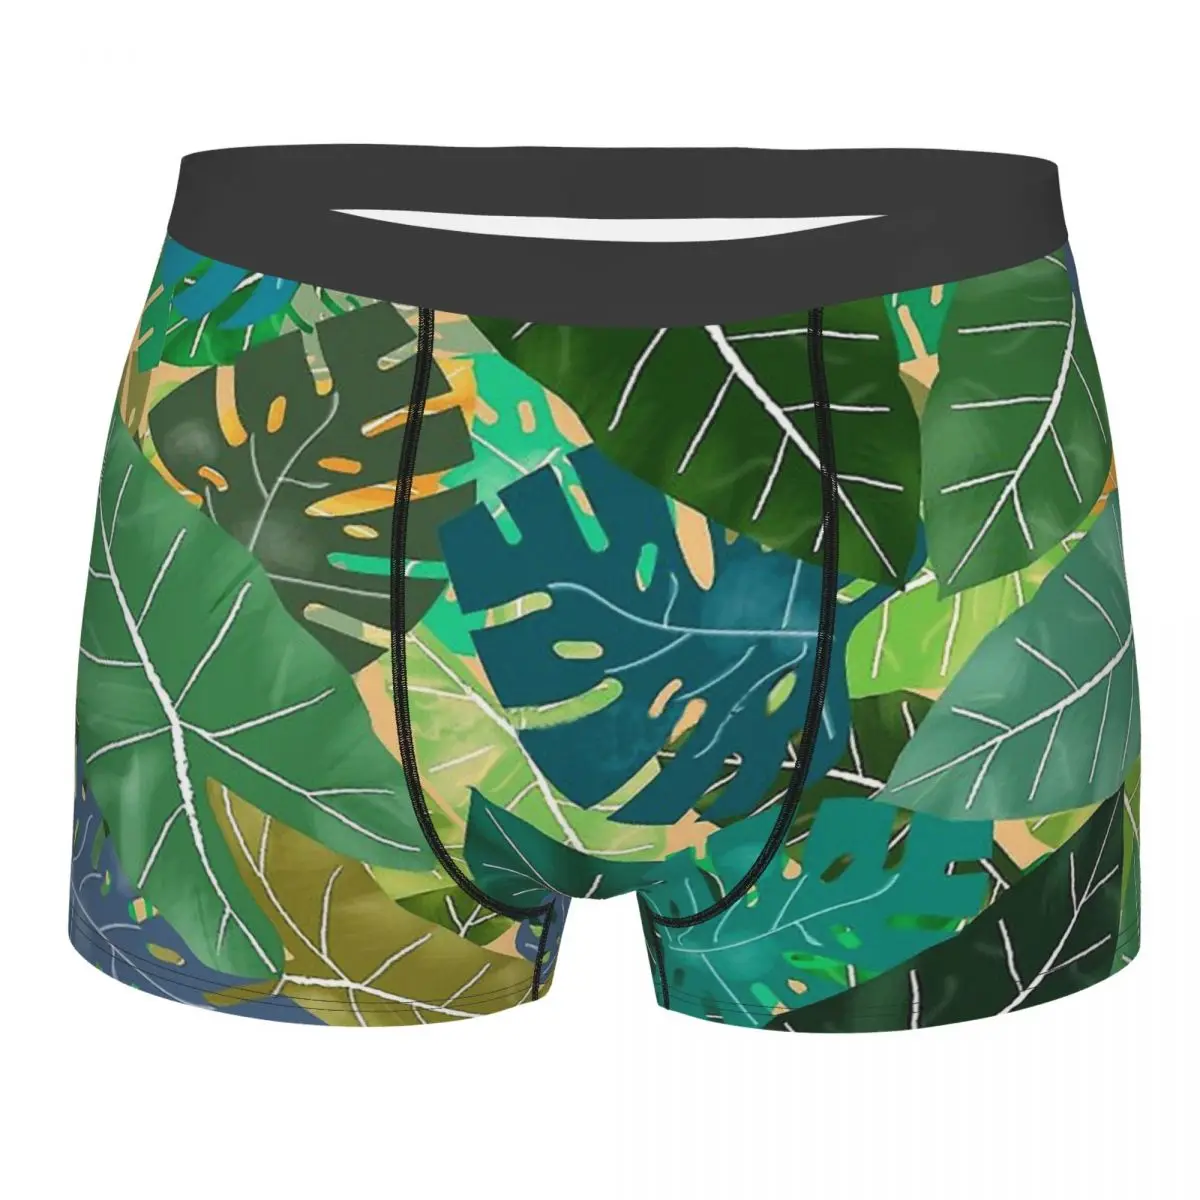 

Elephant Ears And Monstera Tropical Leaves Beach Underpants Cotton Panties Shorts Boxer Briefs Male Underwear Comfortable